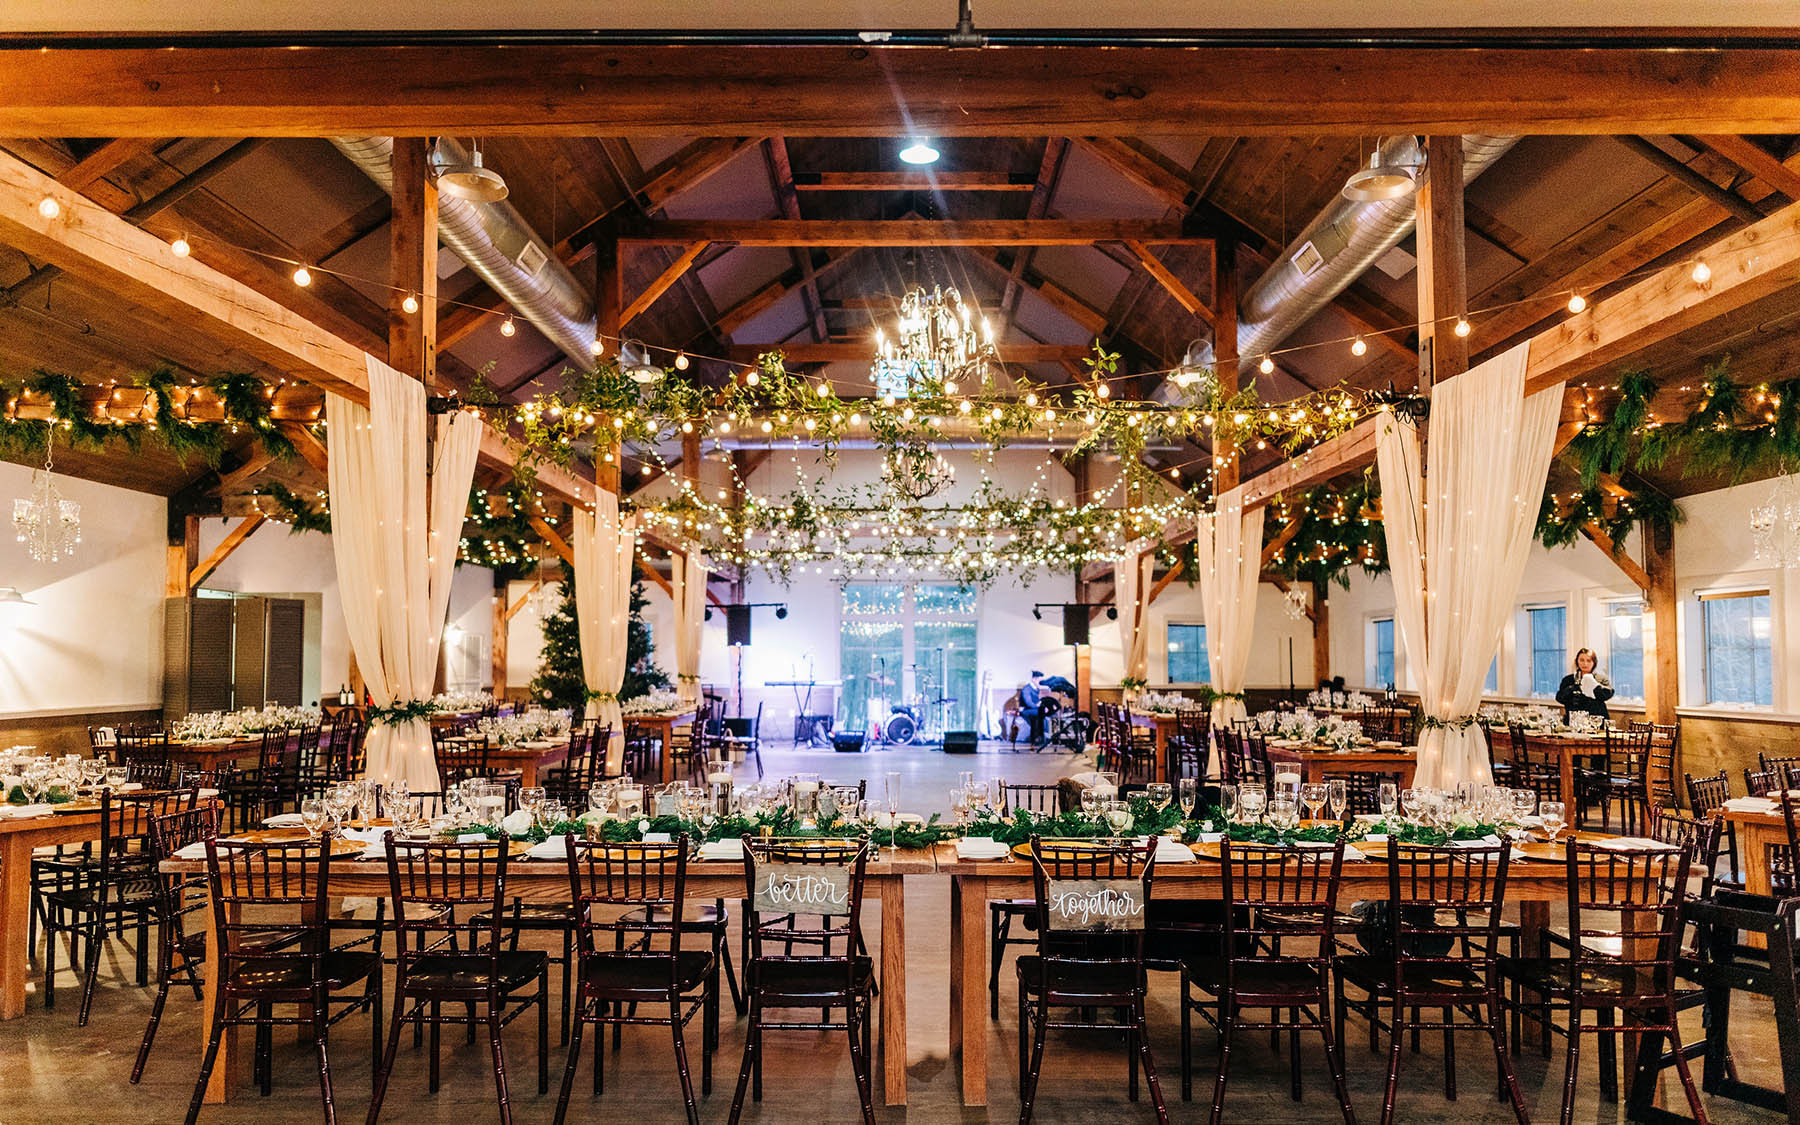 Table with white linens, glassware and floral arrangement centerpiece near other tables under hanging lights in event space at Mountain Top Inn & Resort in Chittenden, VT